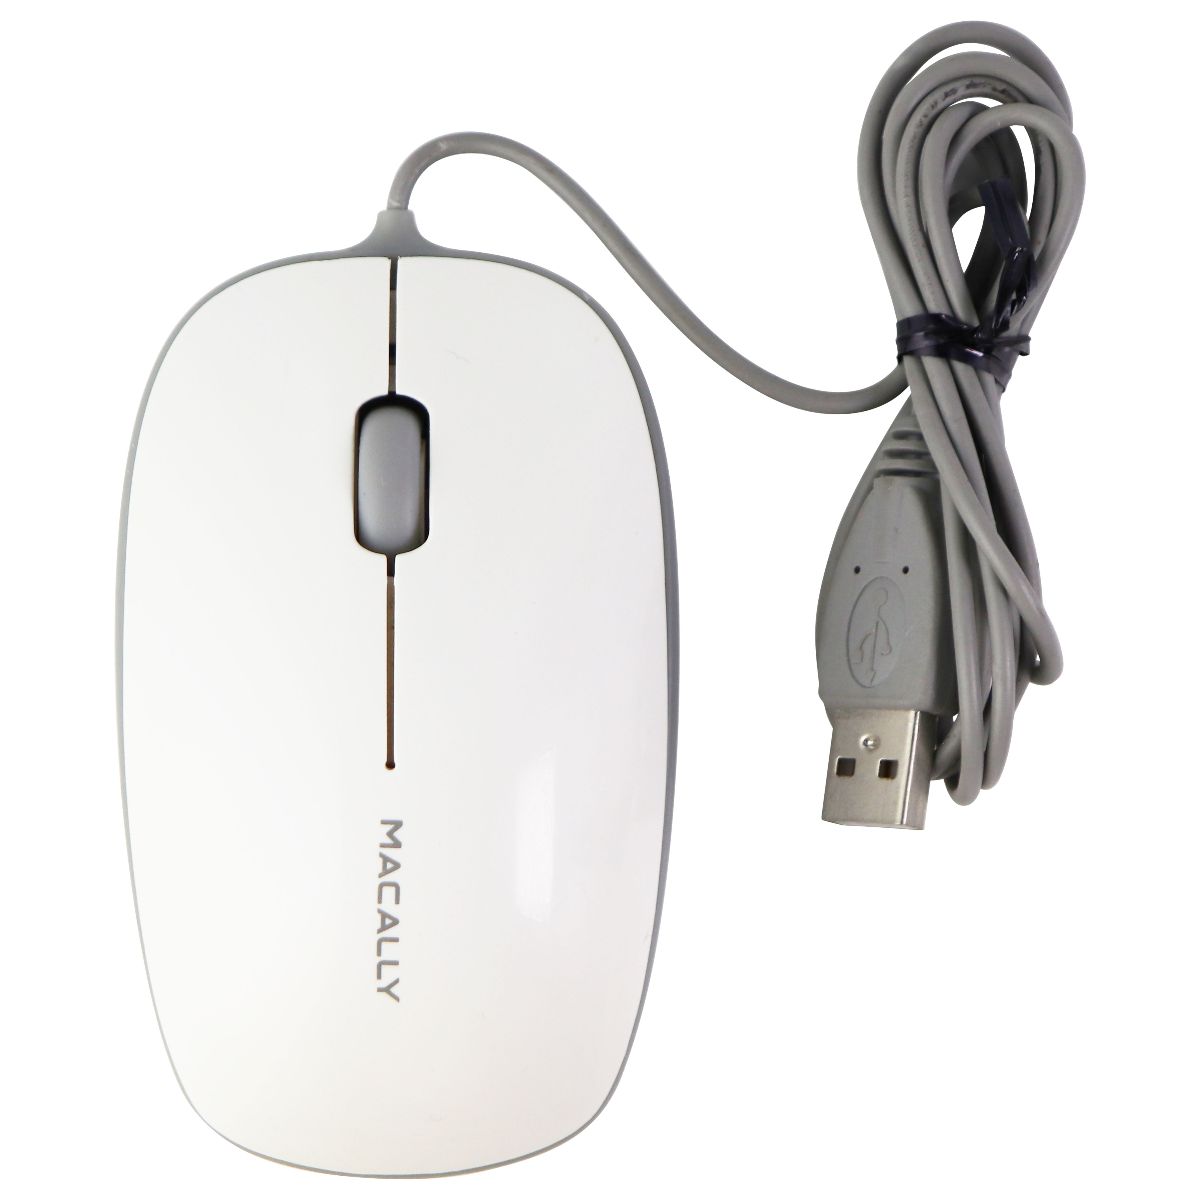 Macally Wired USB Optical Bumper Mouse for Windows PC & More - White/Gray